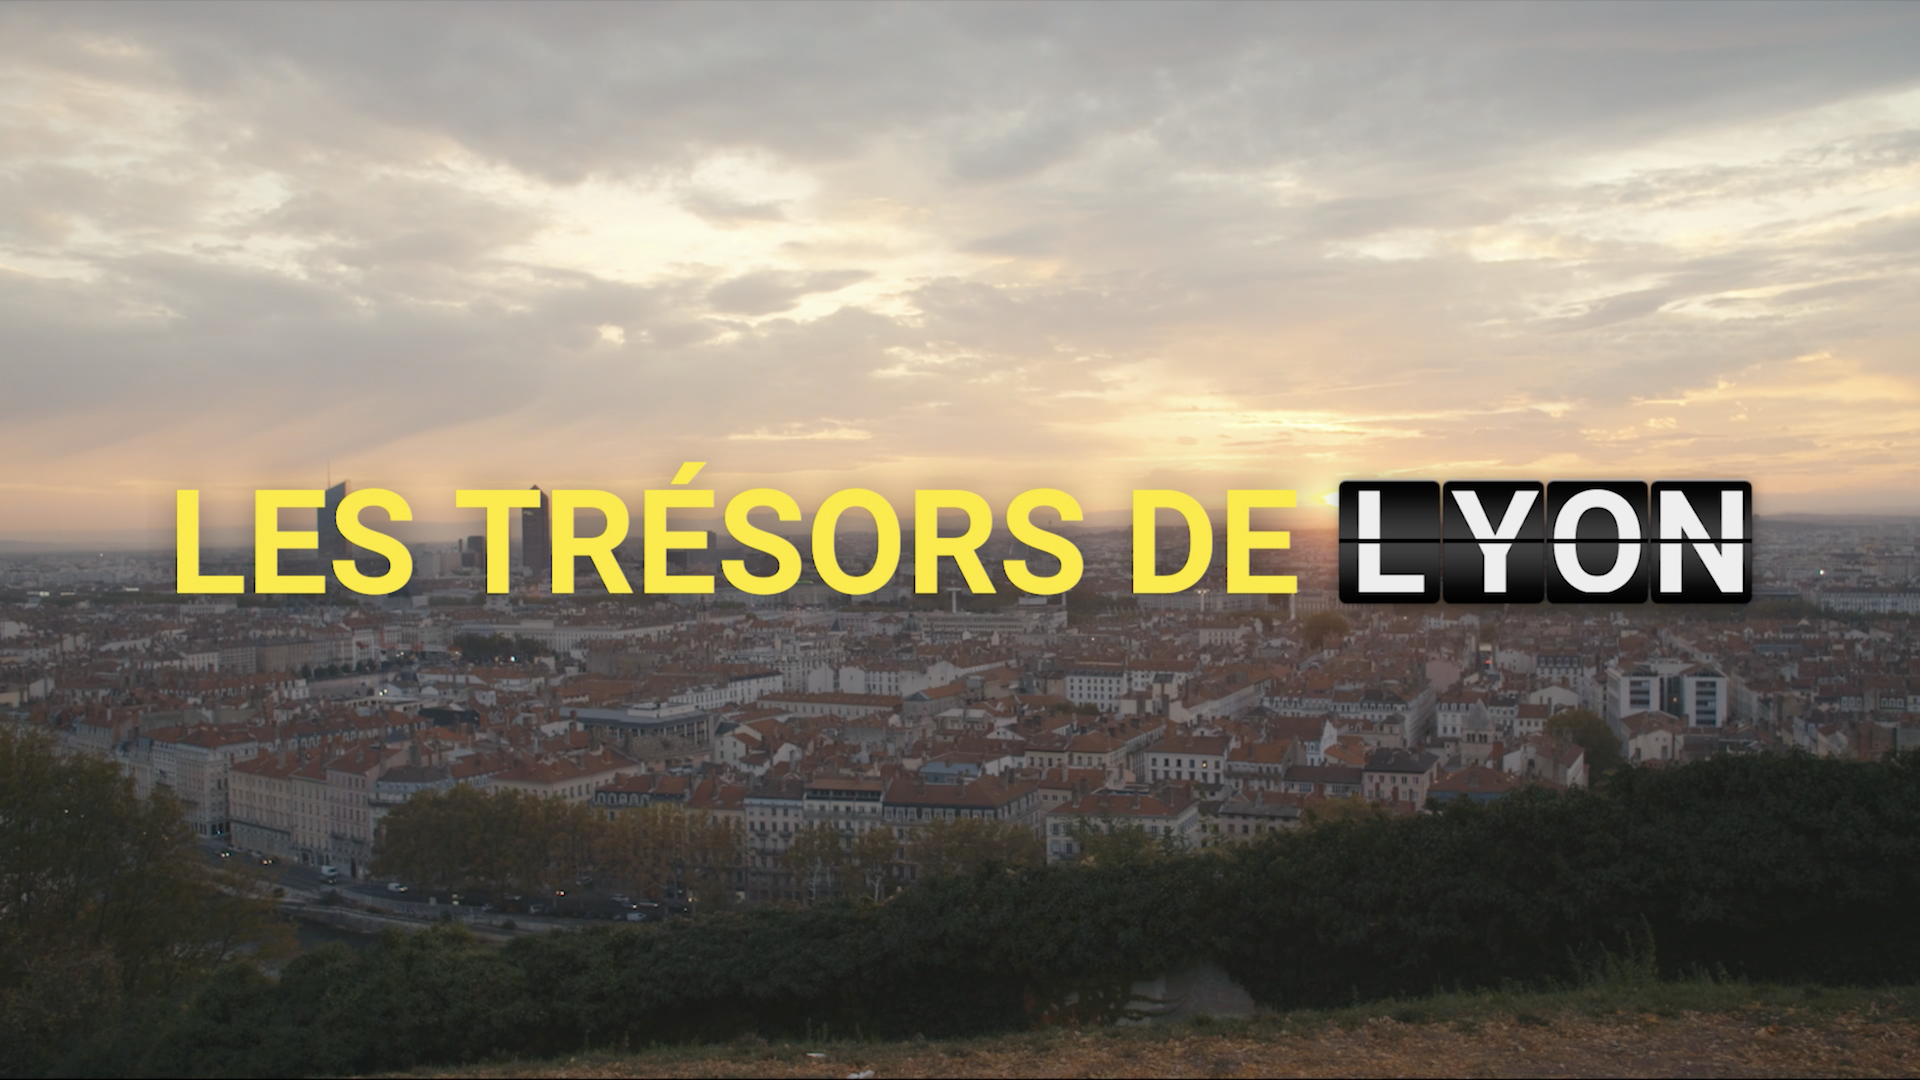 Google, discovering the treasures of Lyon with Manon Bril | Advertising